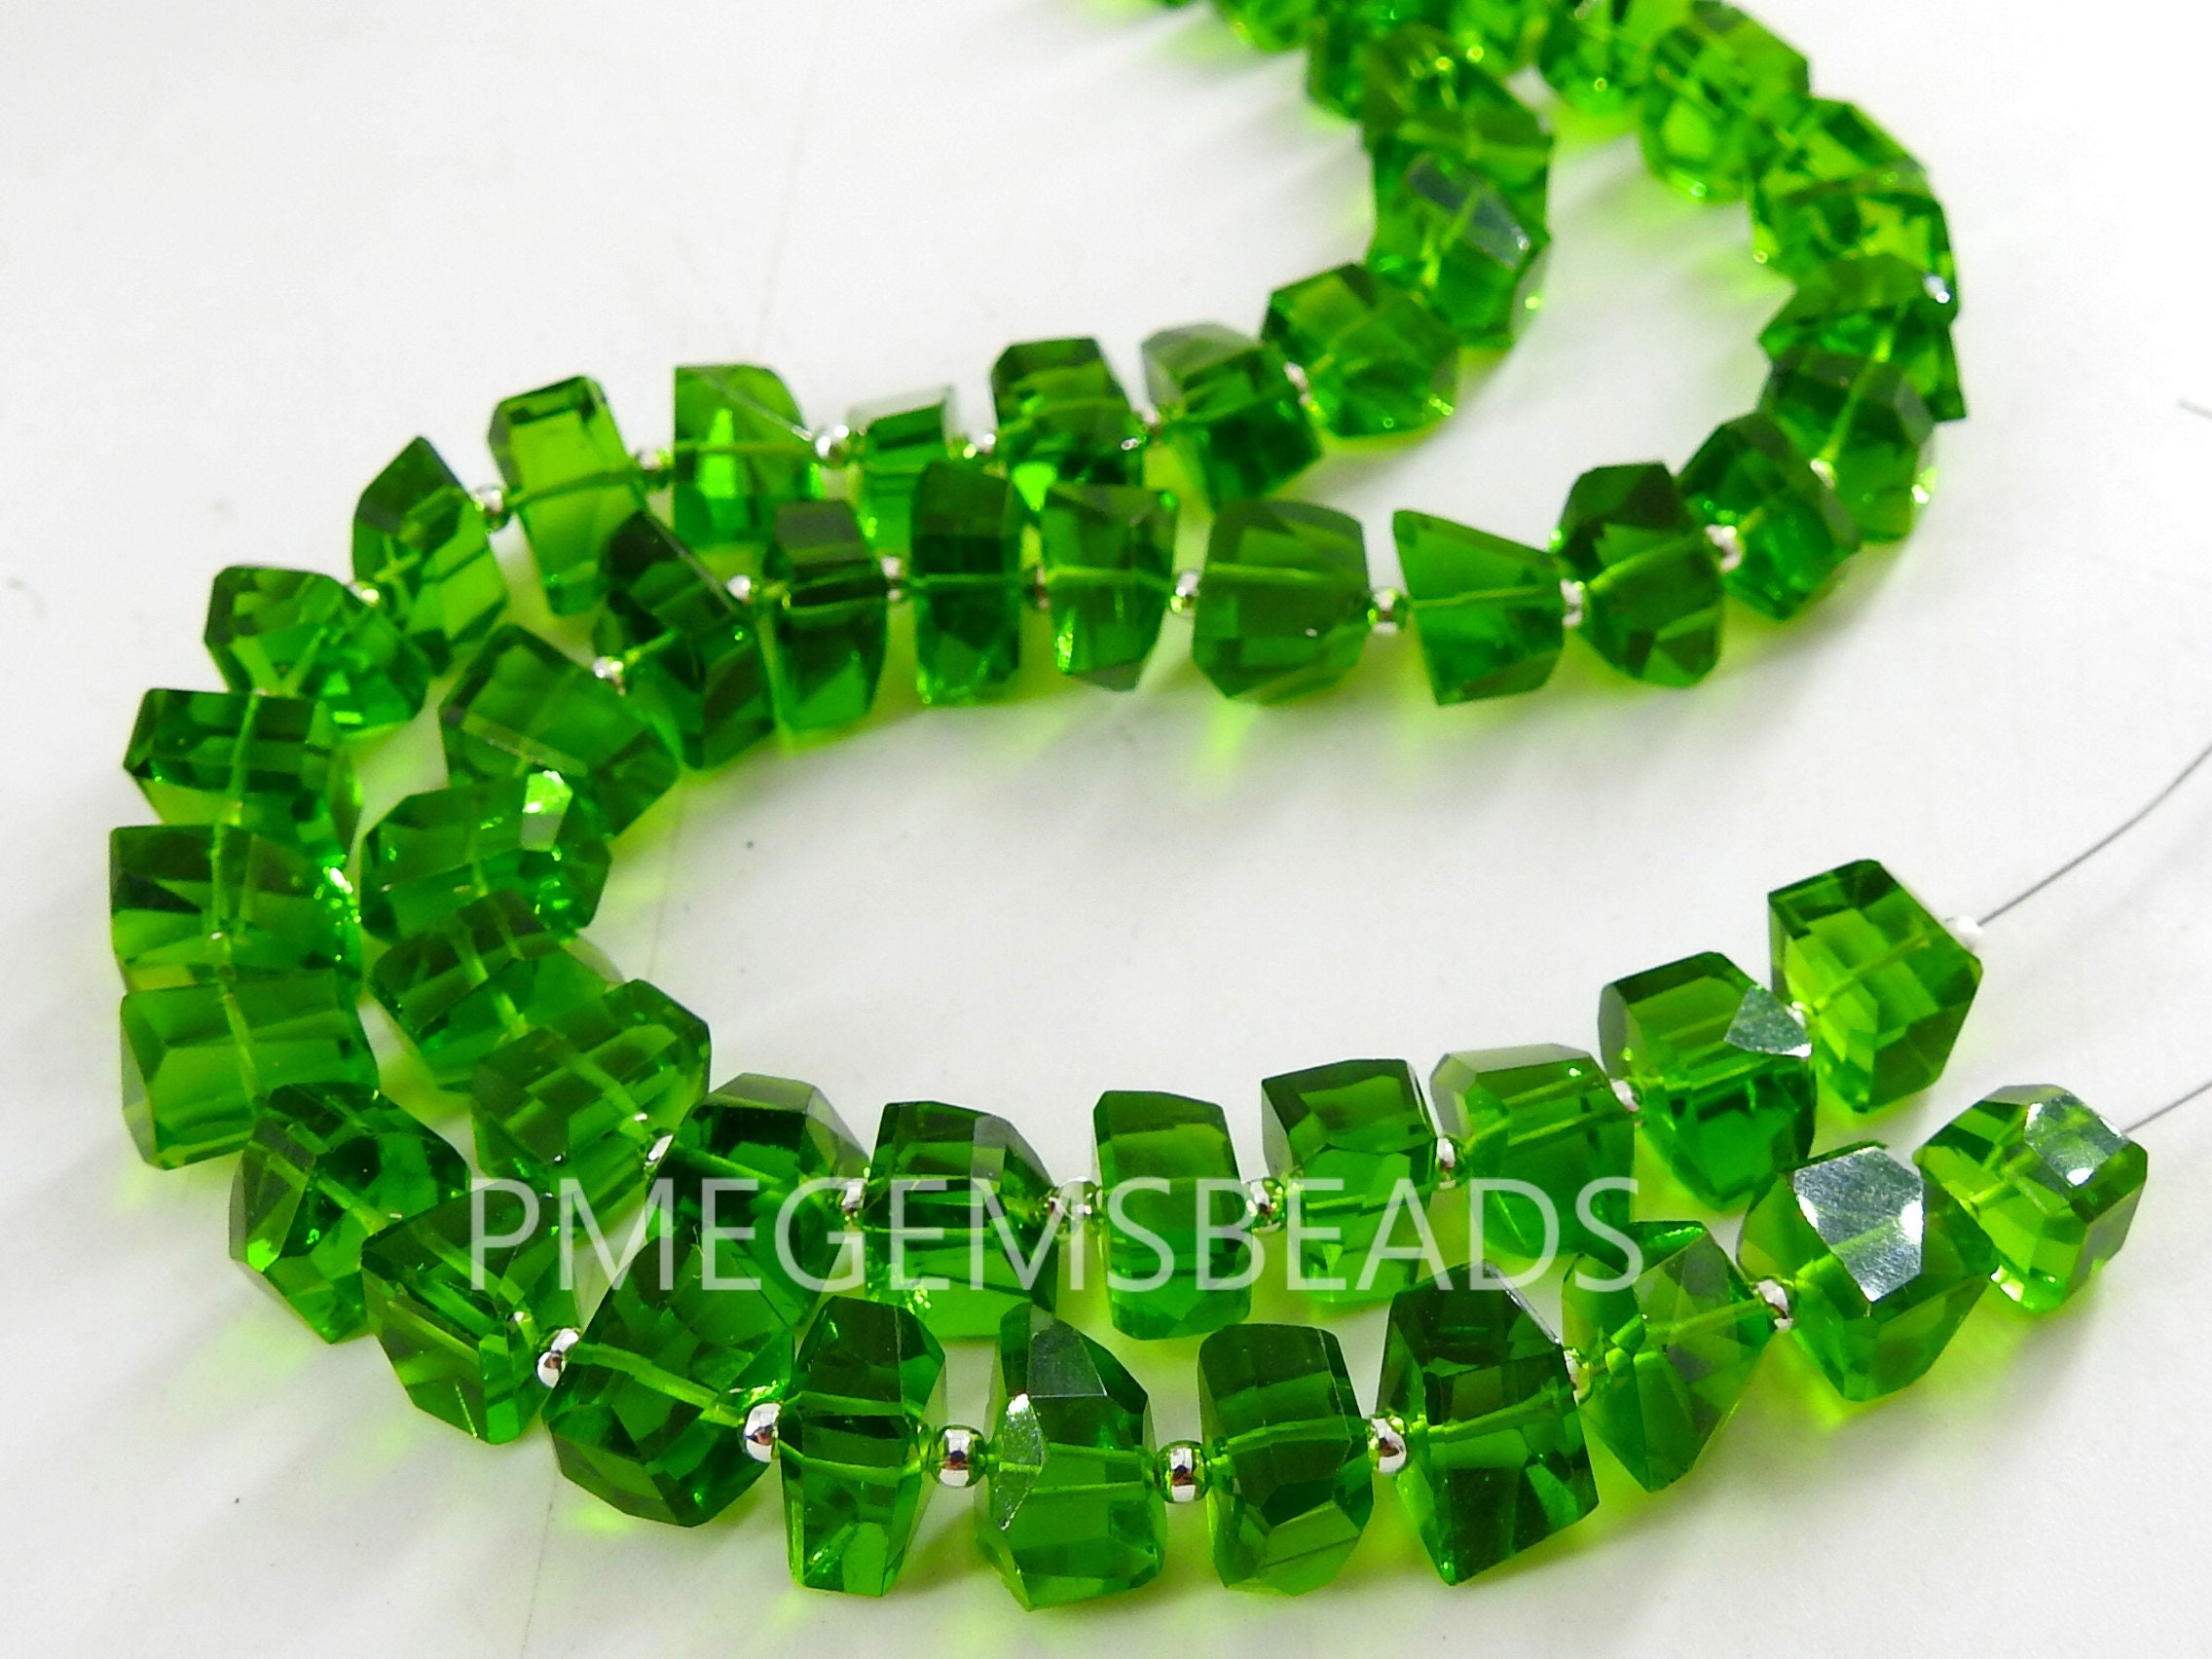 Chrome Green Quartz Faceted Tumble,Nugget,Hydro,Irregular,Loose Stone,For Making Jewelry,Necklace,Bracelet 8Inch 8-10MM Approx (pme) | Save 33% - Rajasthan Living 22